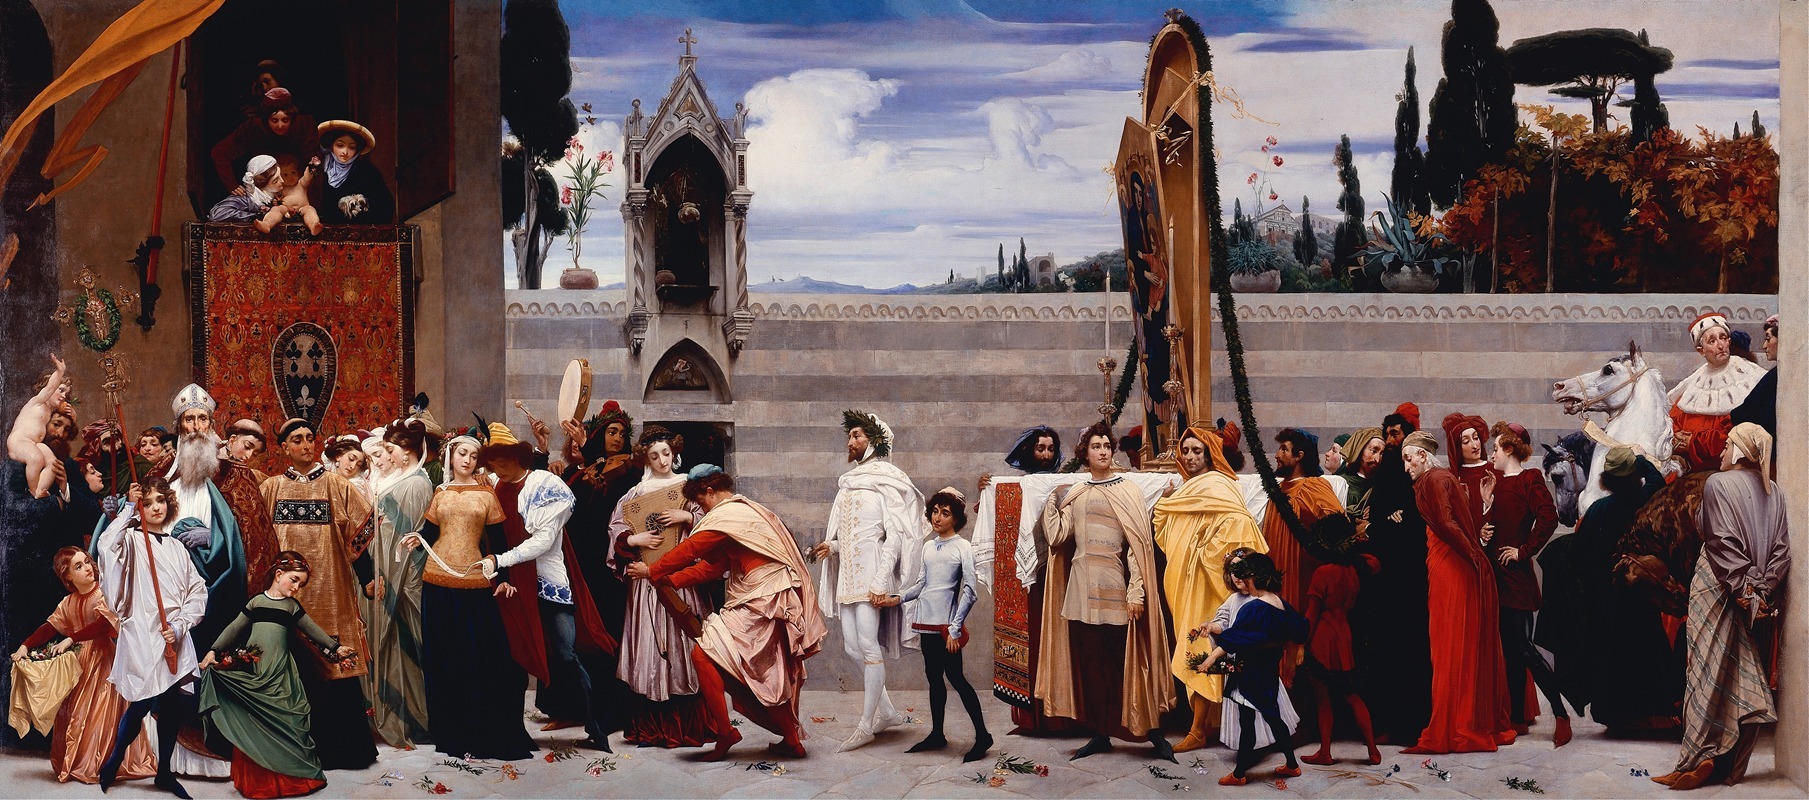 Frederic Leighton - Cimabue’s Madonna Carried in Procession